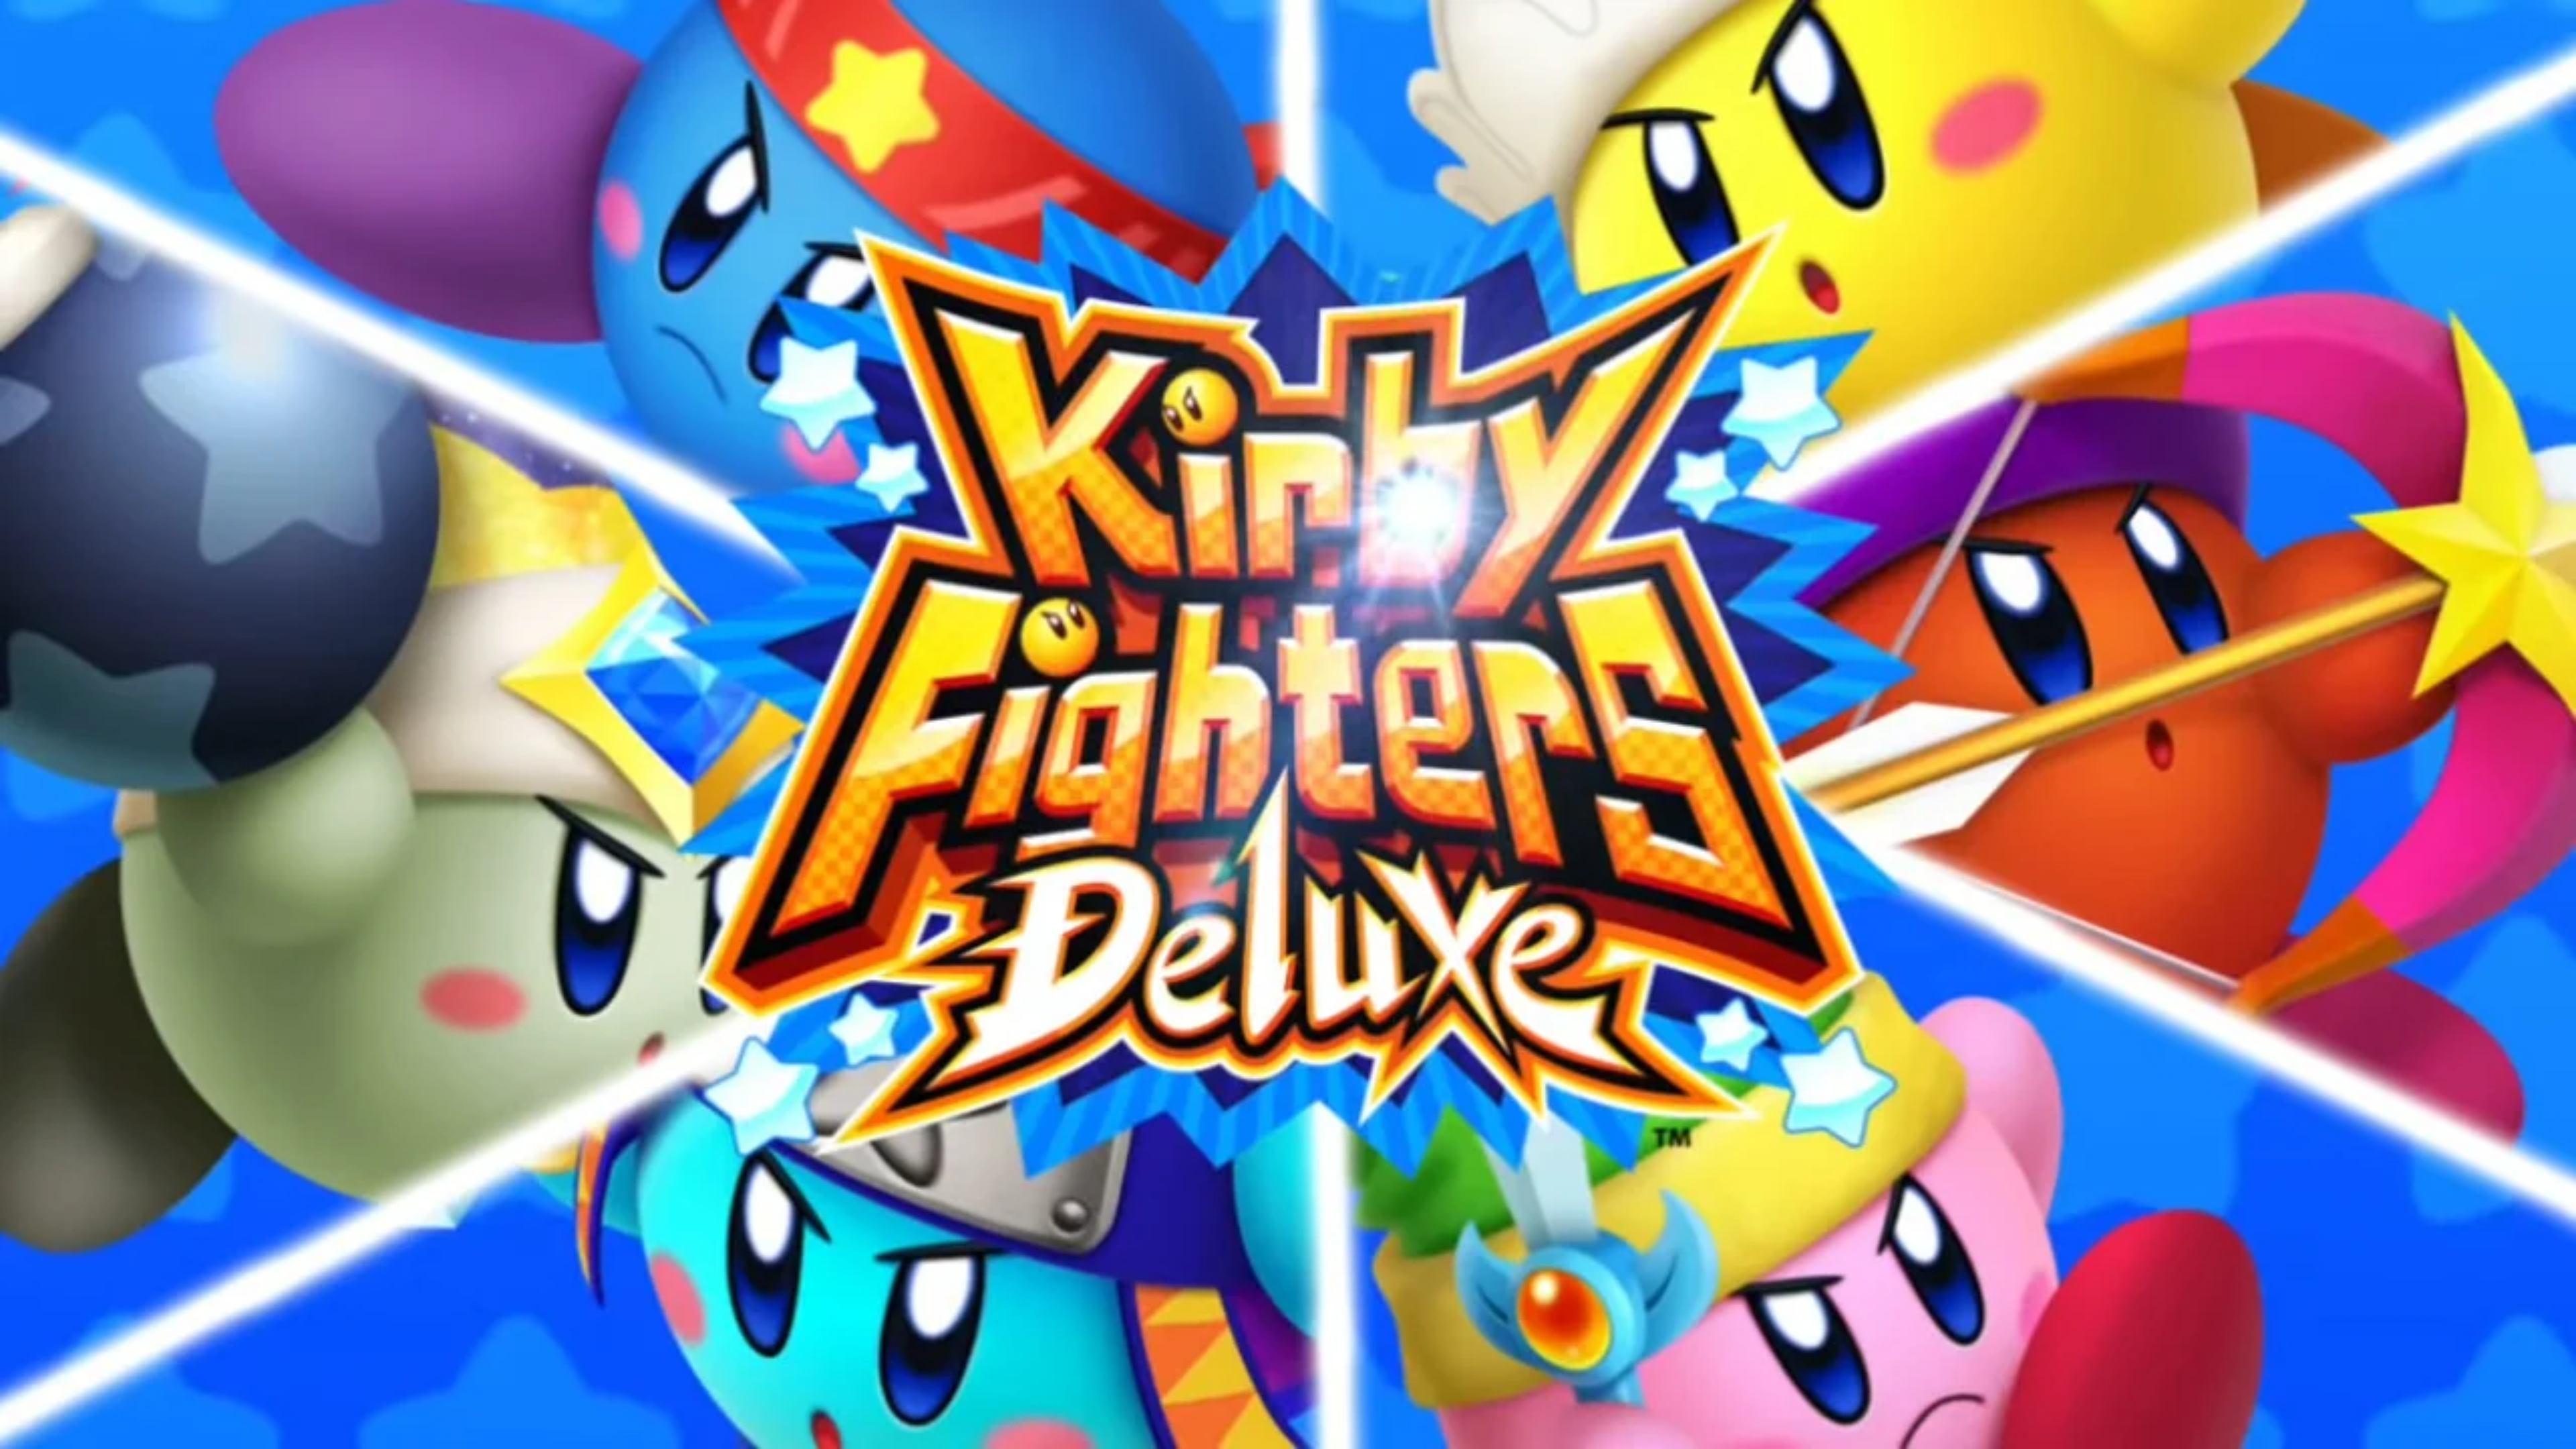 Kirby Fighters 2 for Nintendo Switch Accidentally Leaked - Marooners\' Rock